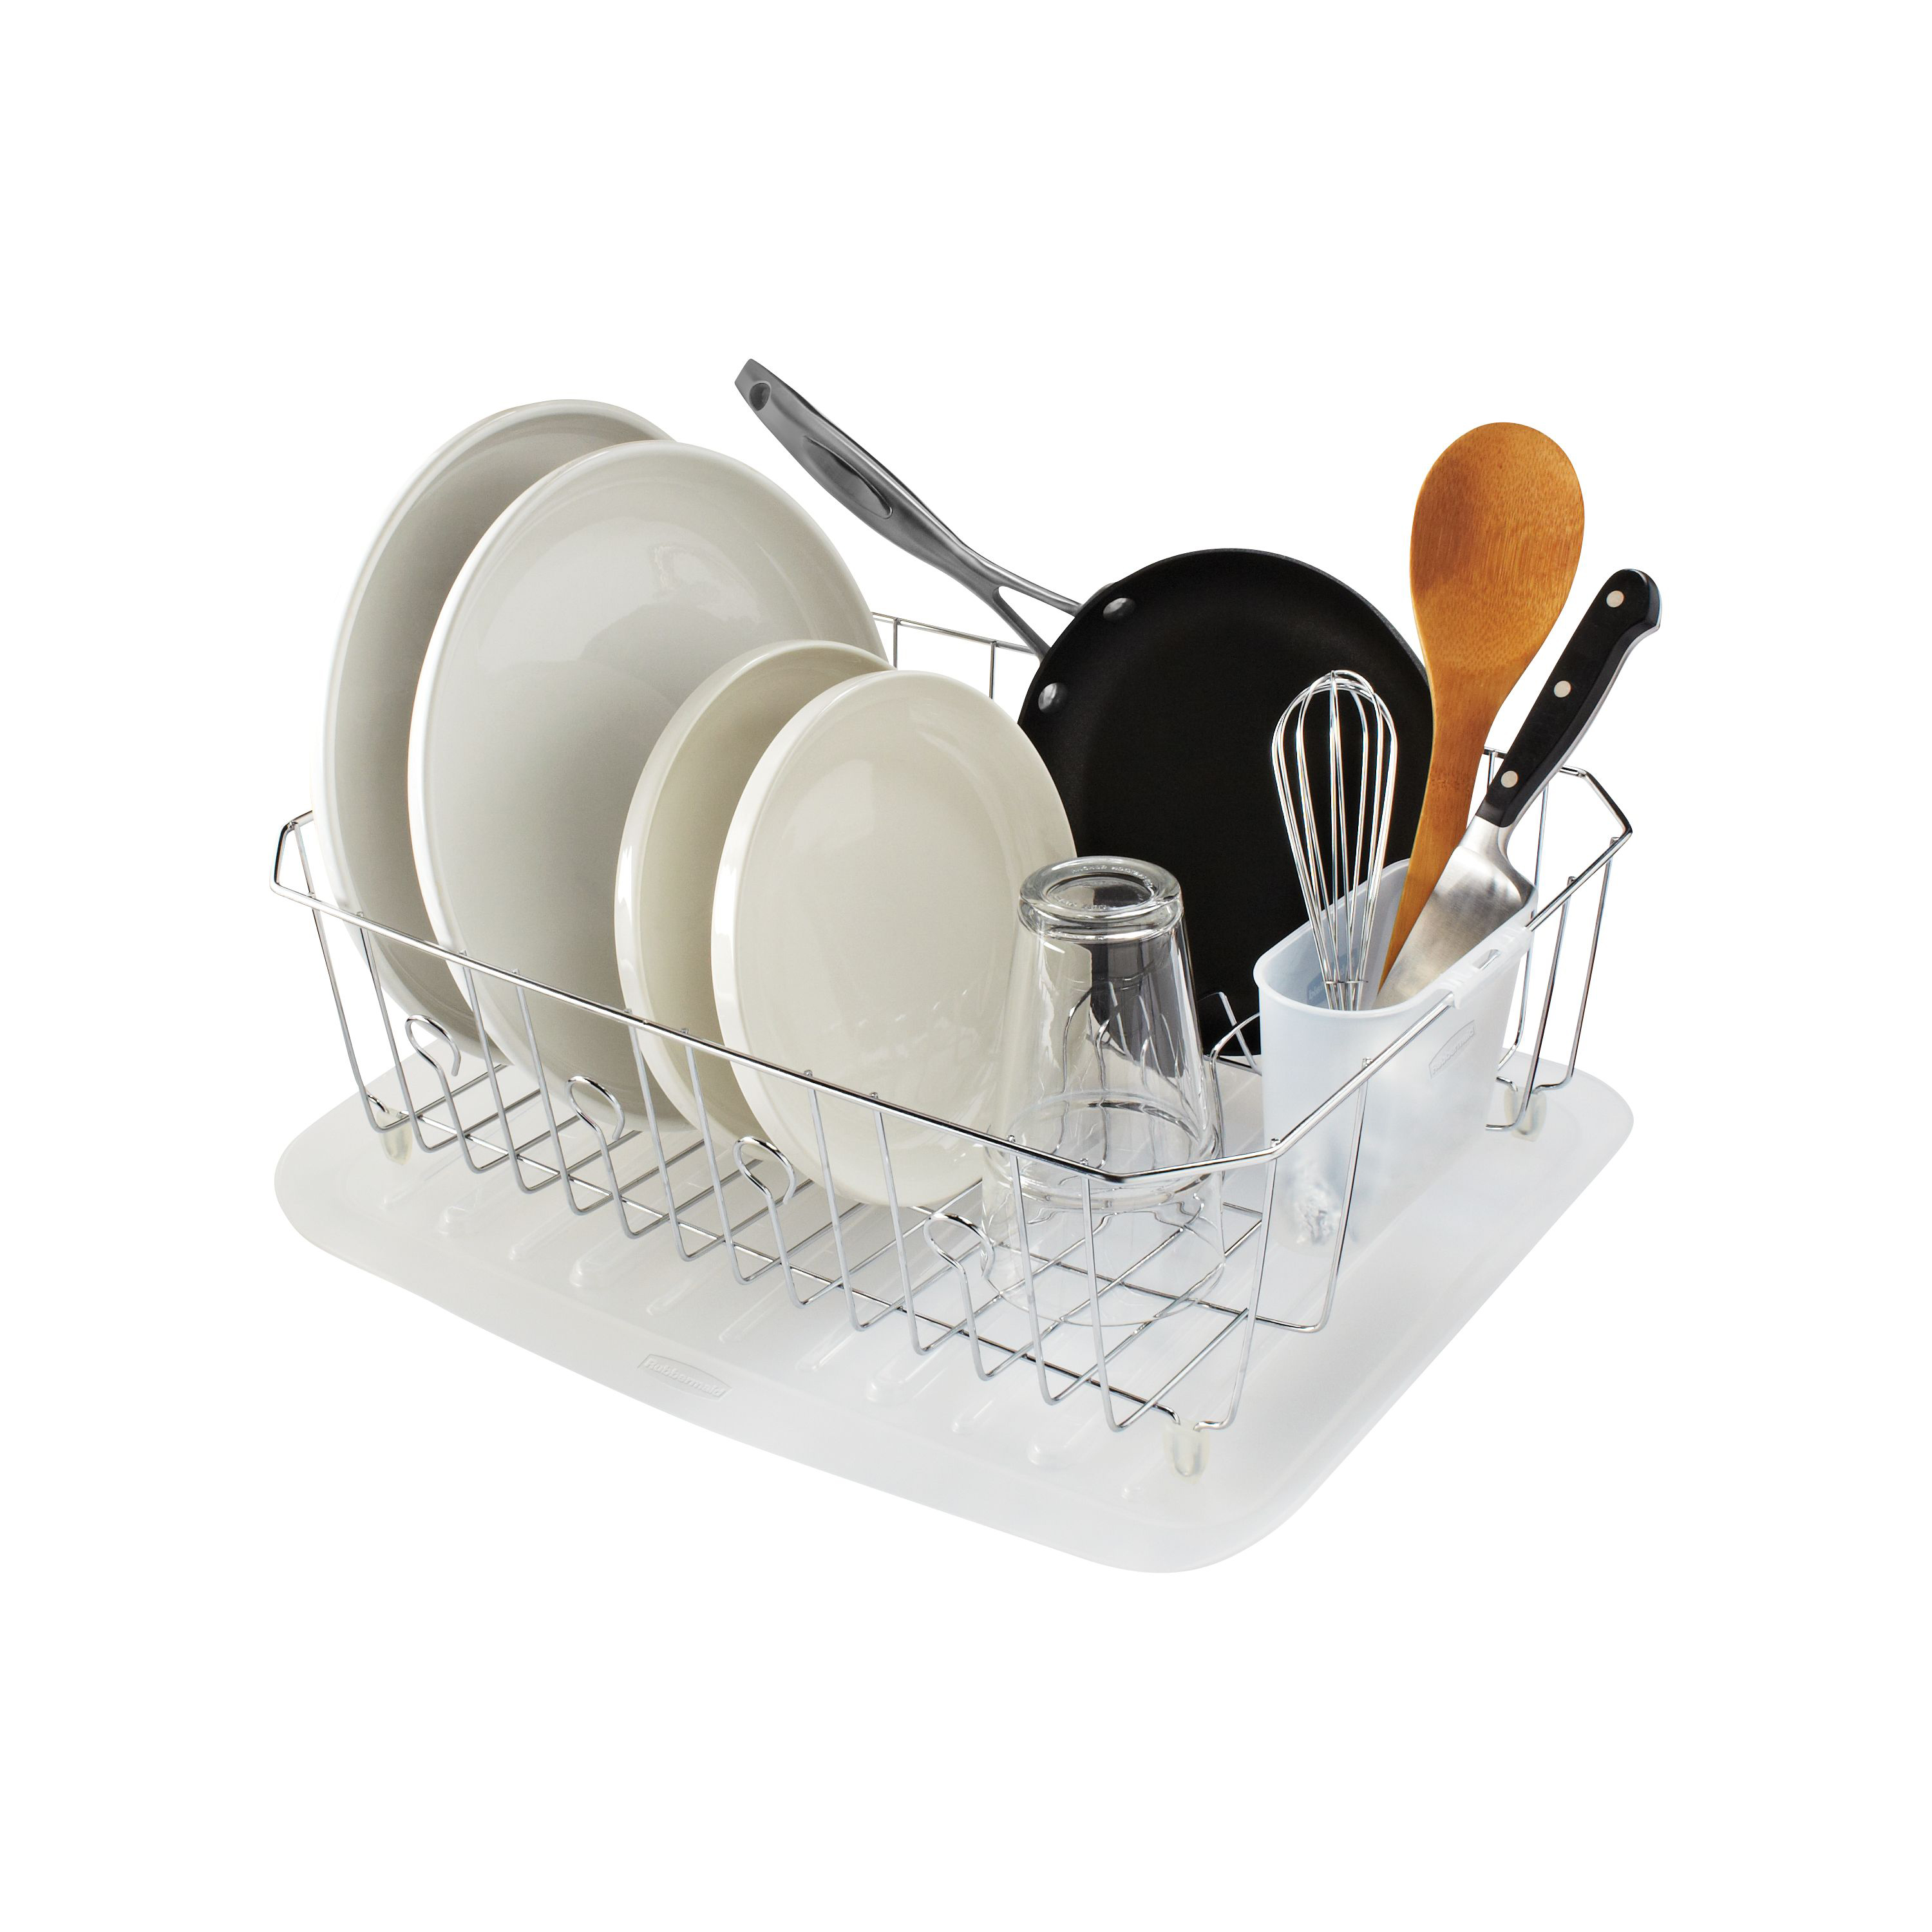 Dish Drying Rack, Rubbermaid Dish Rack with Utensil Holder for Kitchen Countertop, Large, Chrome - image 5 of 5